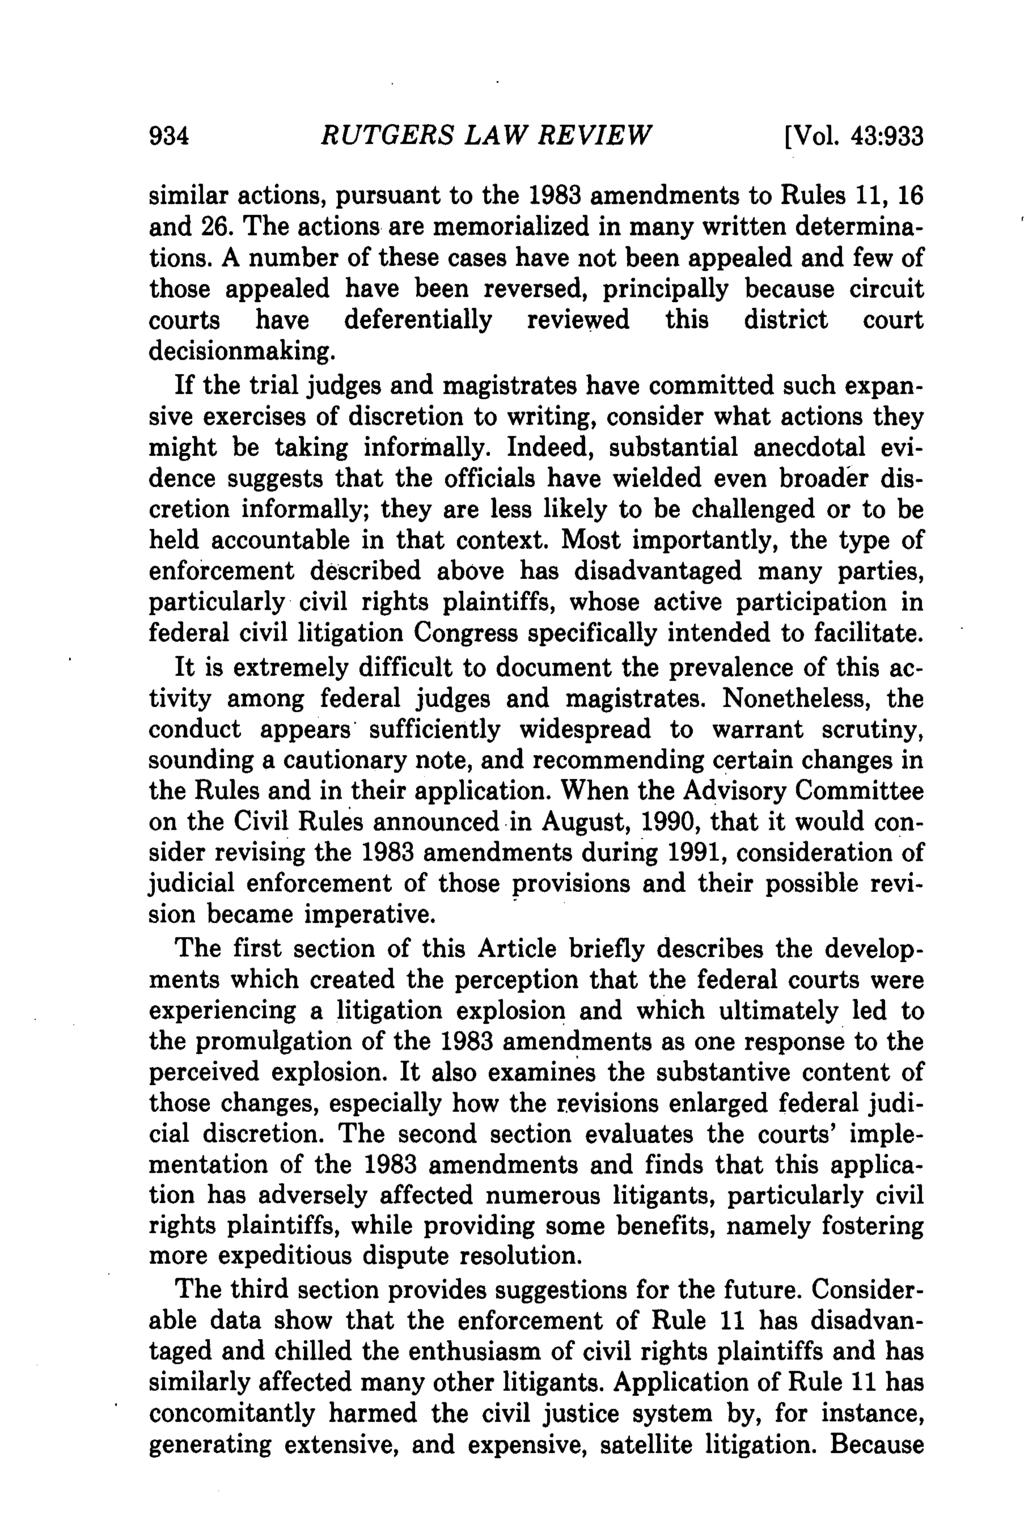 934 RUTGERS LAW REVIEW [Vol. 43:933 similar actions, pursuant to the 1983 amendments to Rules 11, 16 and 26. The actions are memorialized in many written determinations.